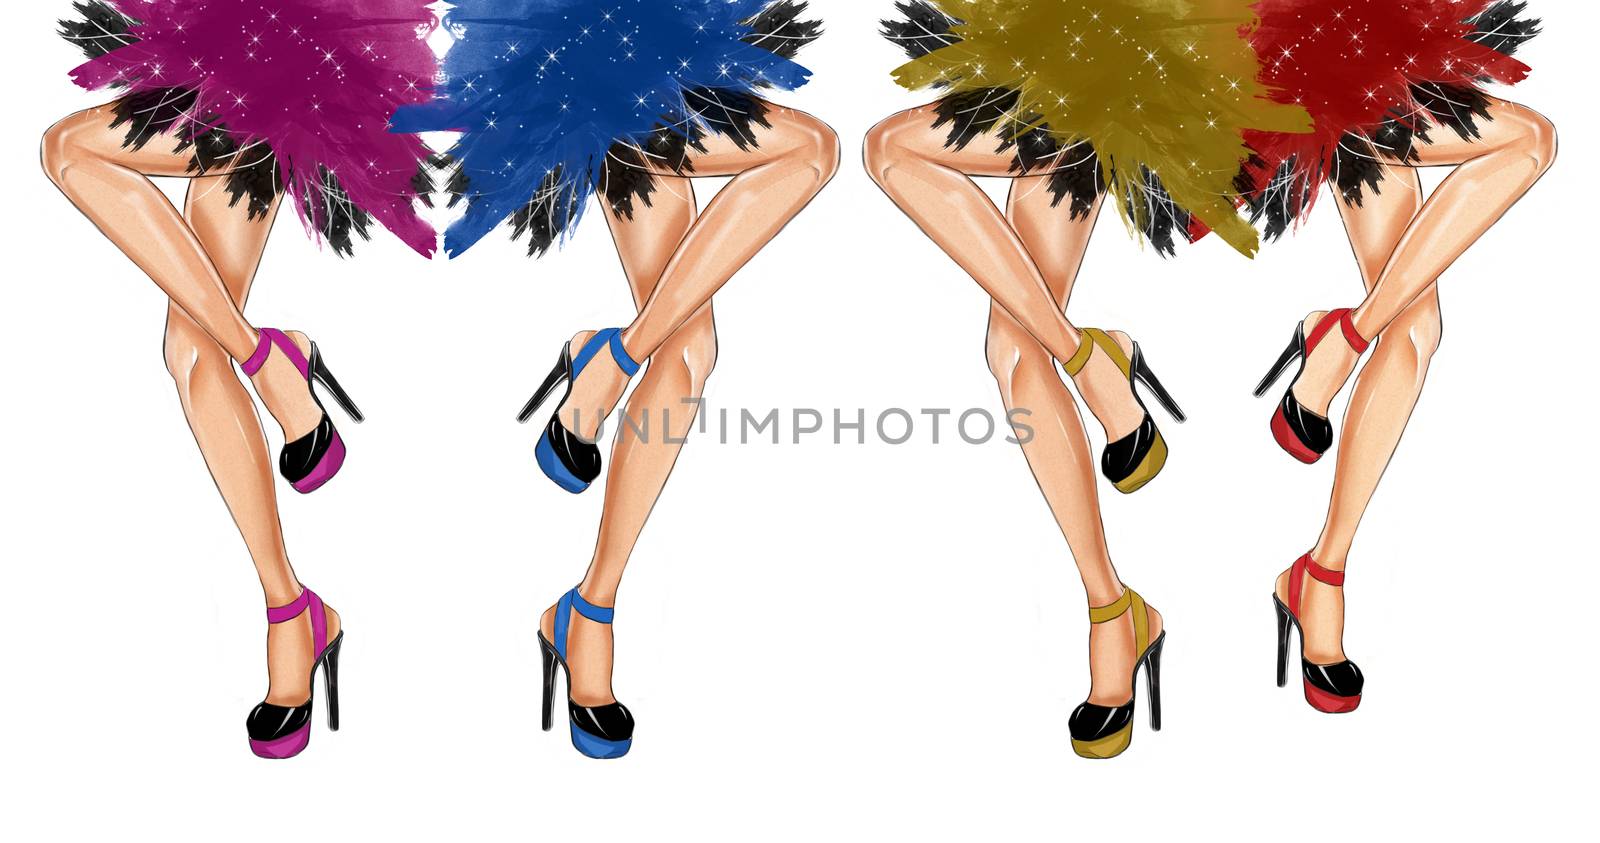 Watercolor hand drawn fashion Illustration of dancing legs by GGillustrations